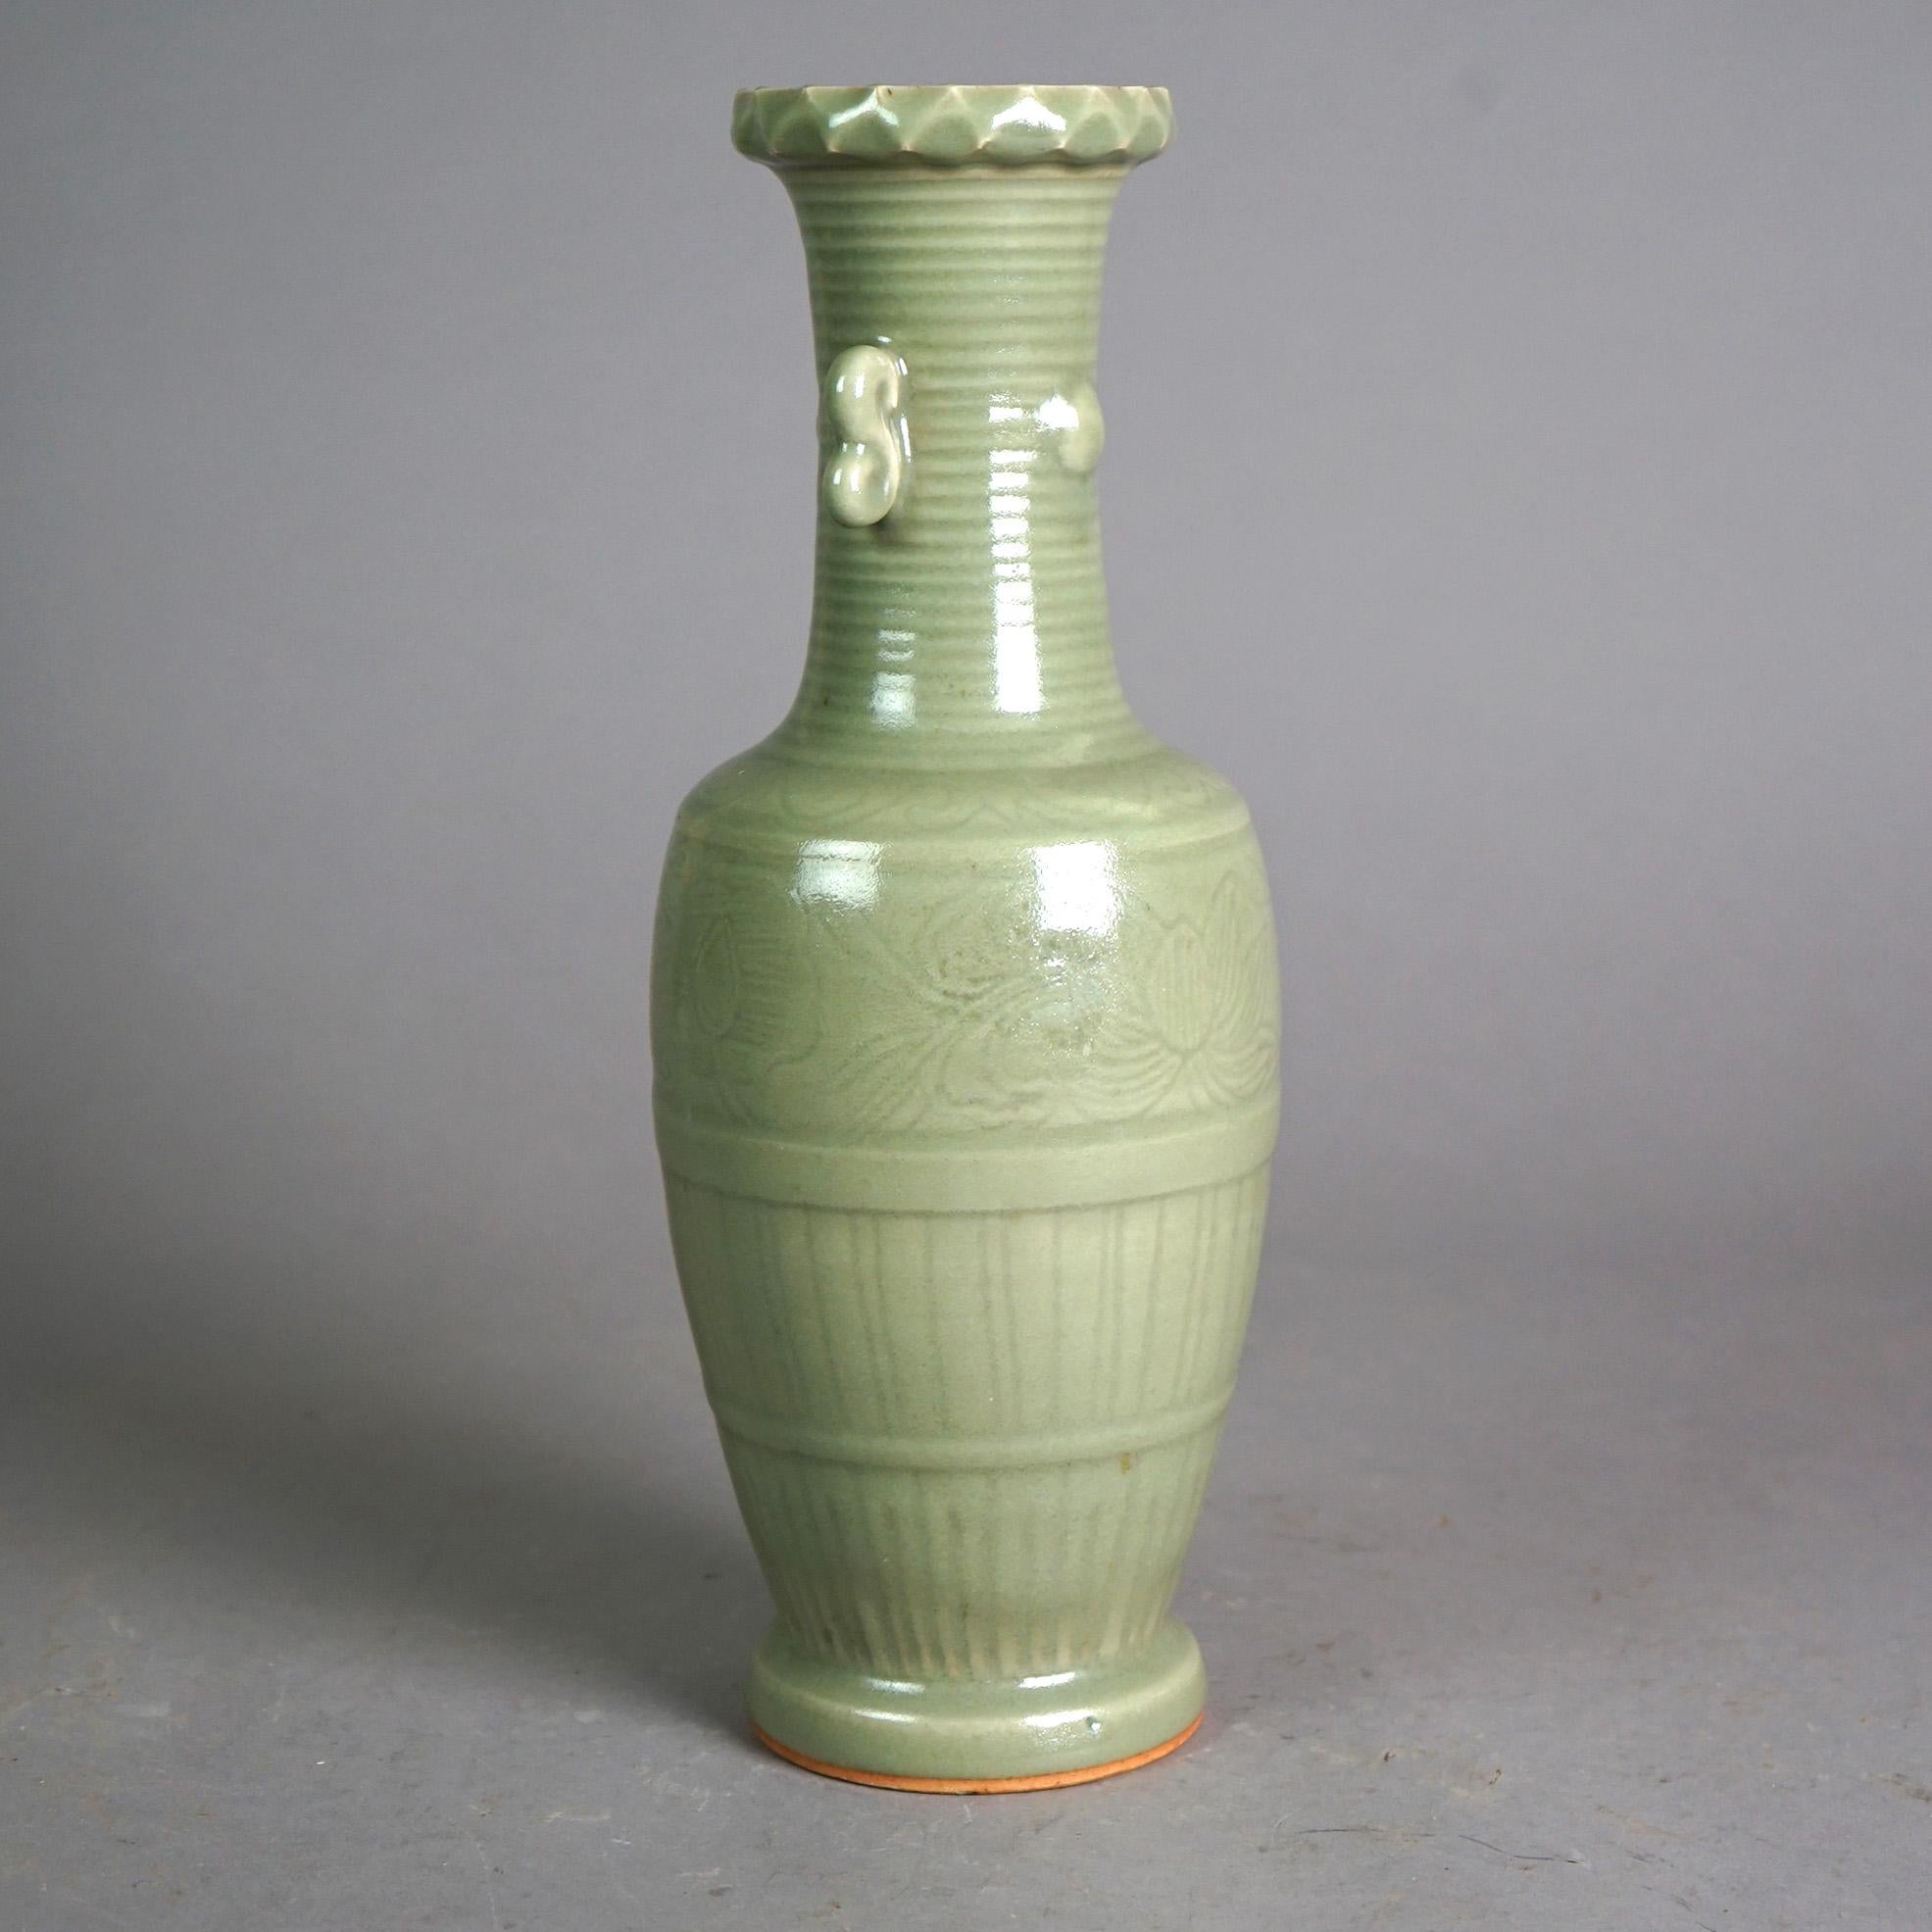 An antique Chinese vase offers art pottery construction with double scroll form handles, incised decoration and celadon glaze, c1930

Measures - 13.5